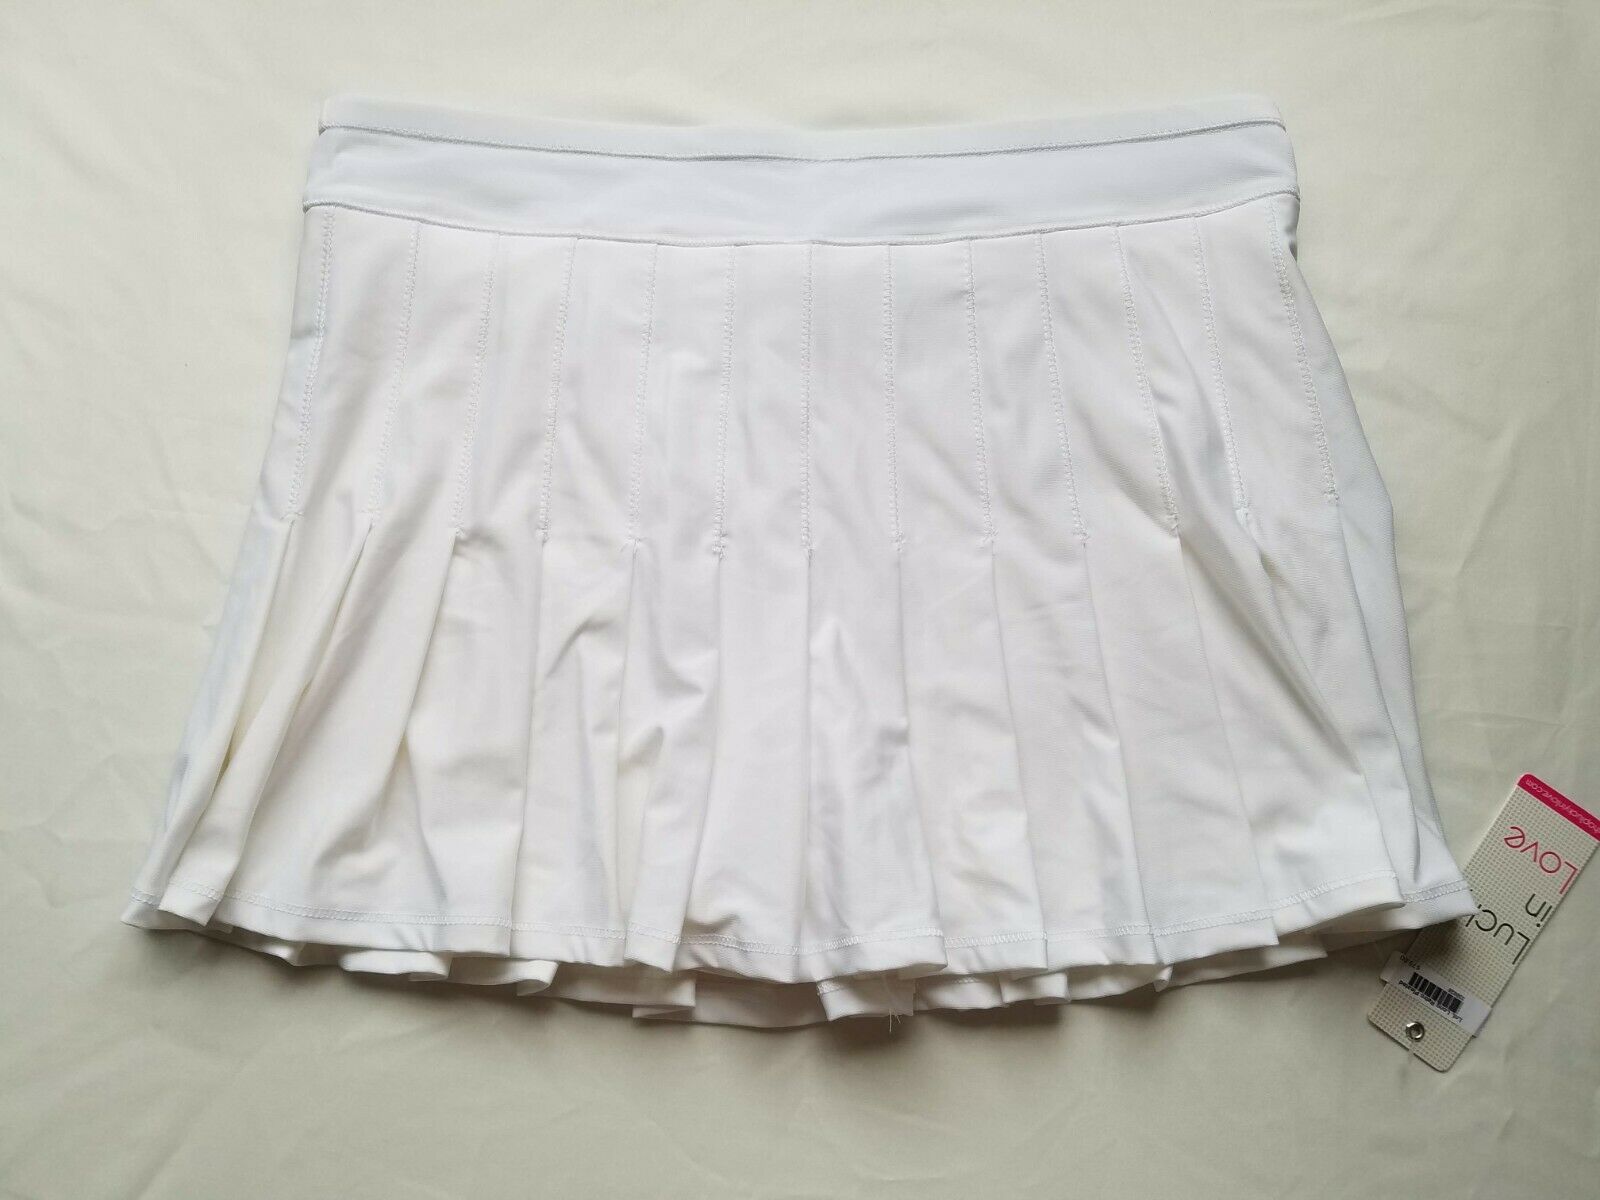 1 Nwt Women's Lucky In Love Skort, Size: Large, Color: White (j313)